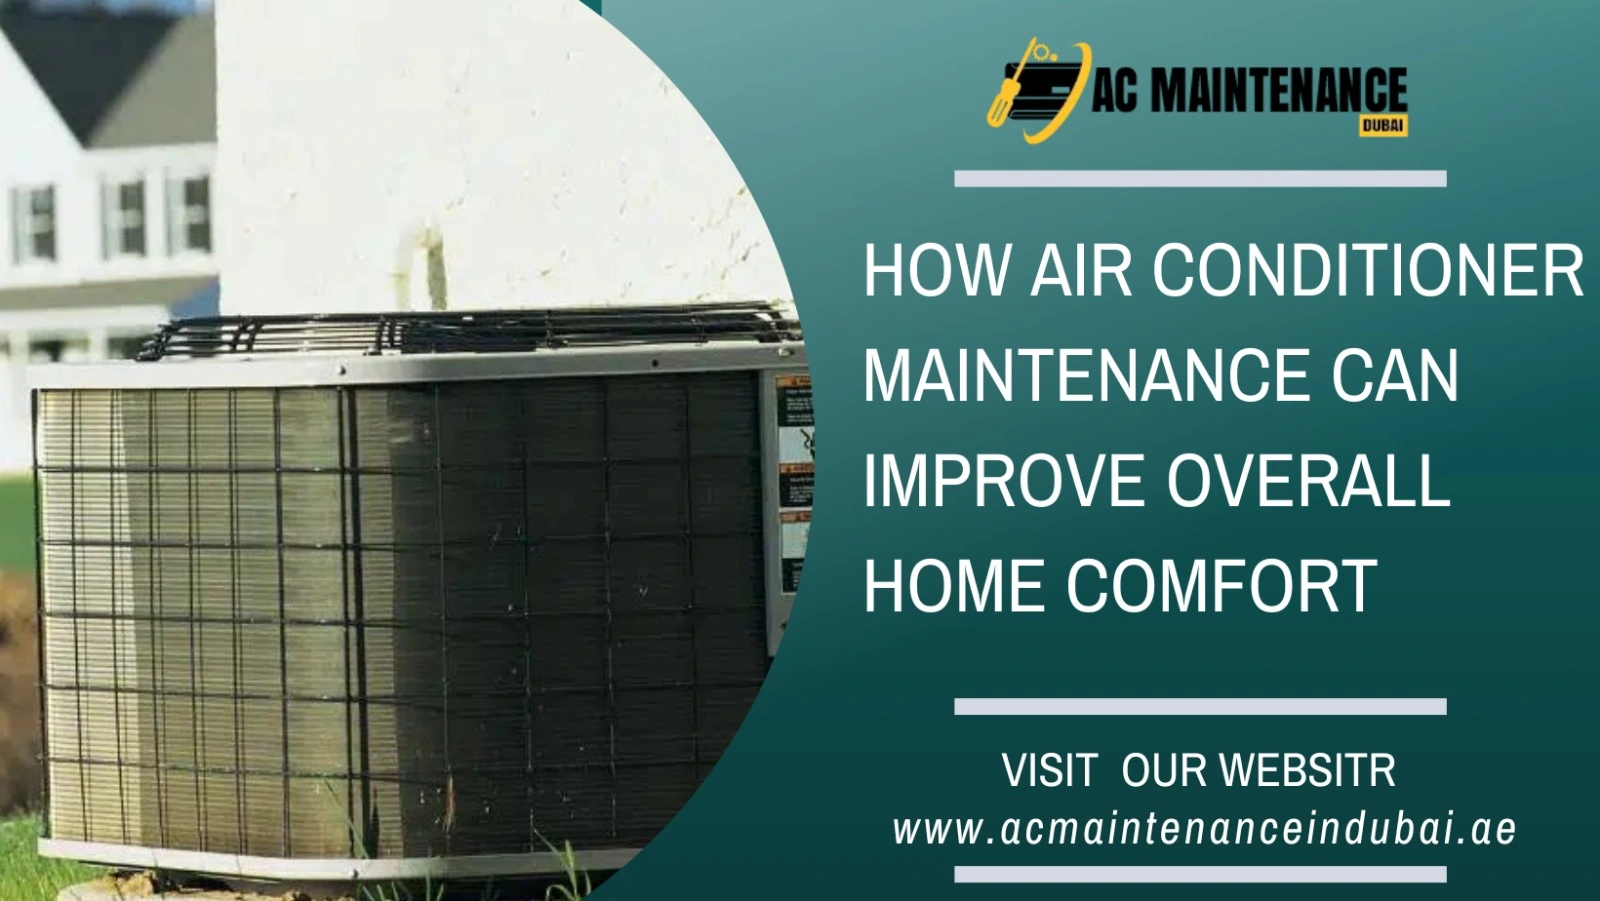 How Air Conditioner Maintenance Can Improve Overall Home Comfort